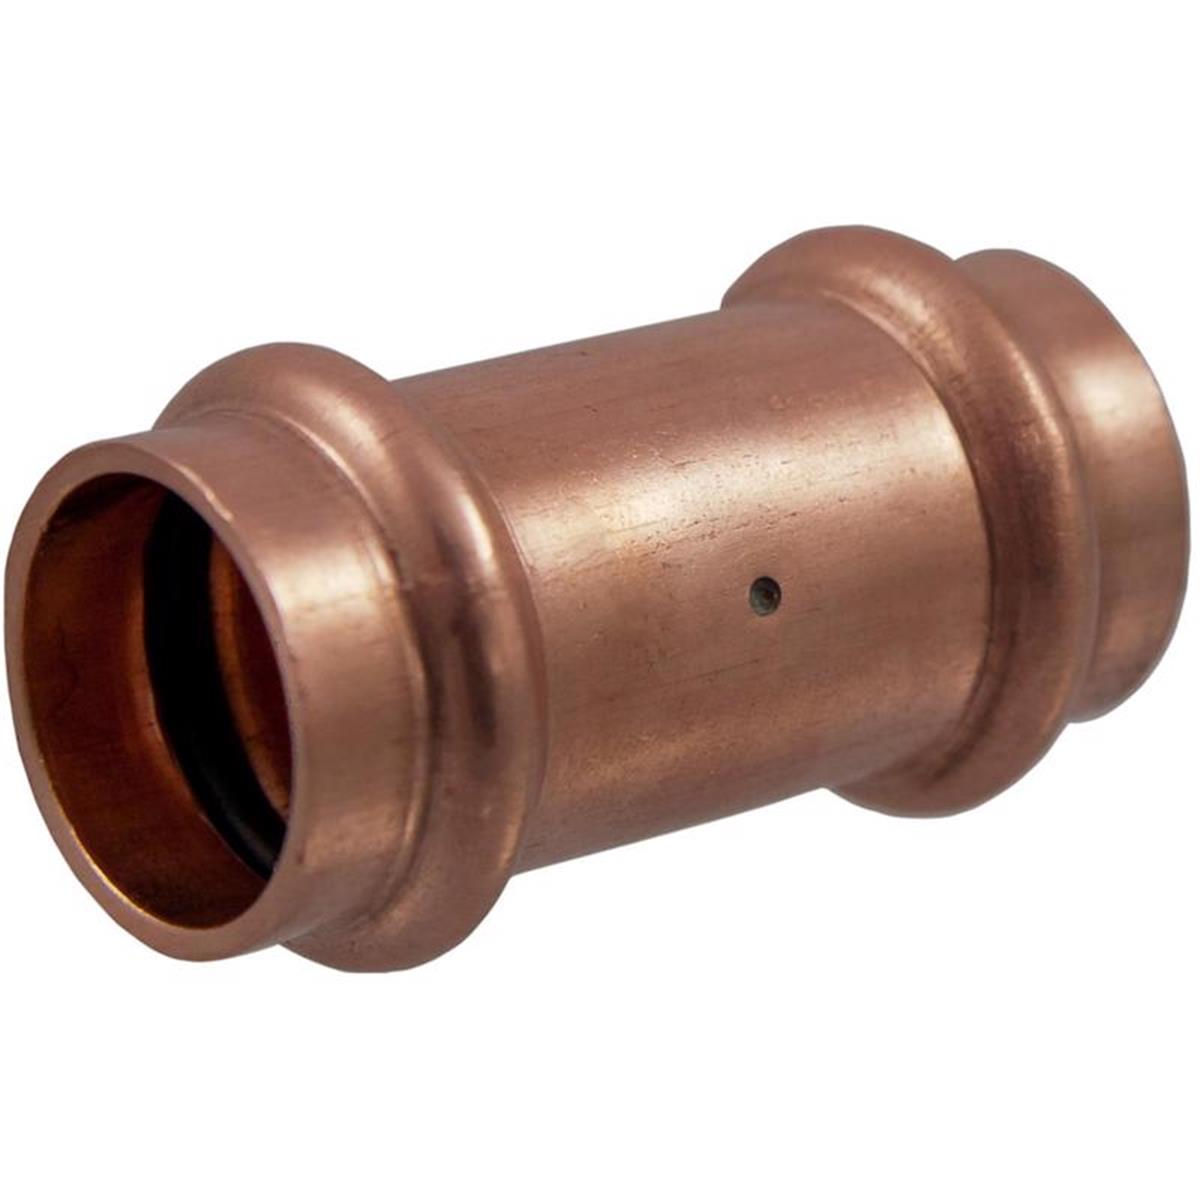 Picture of Nebo 4010262 0.75 in. Press X 0.75 in. Press Wrought Copper Coupling